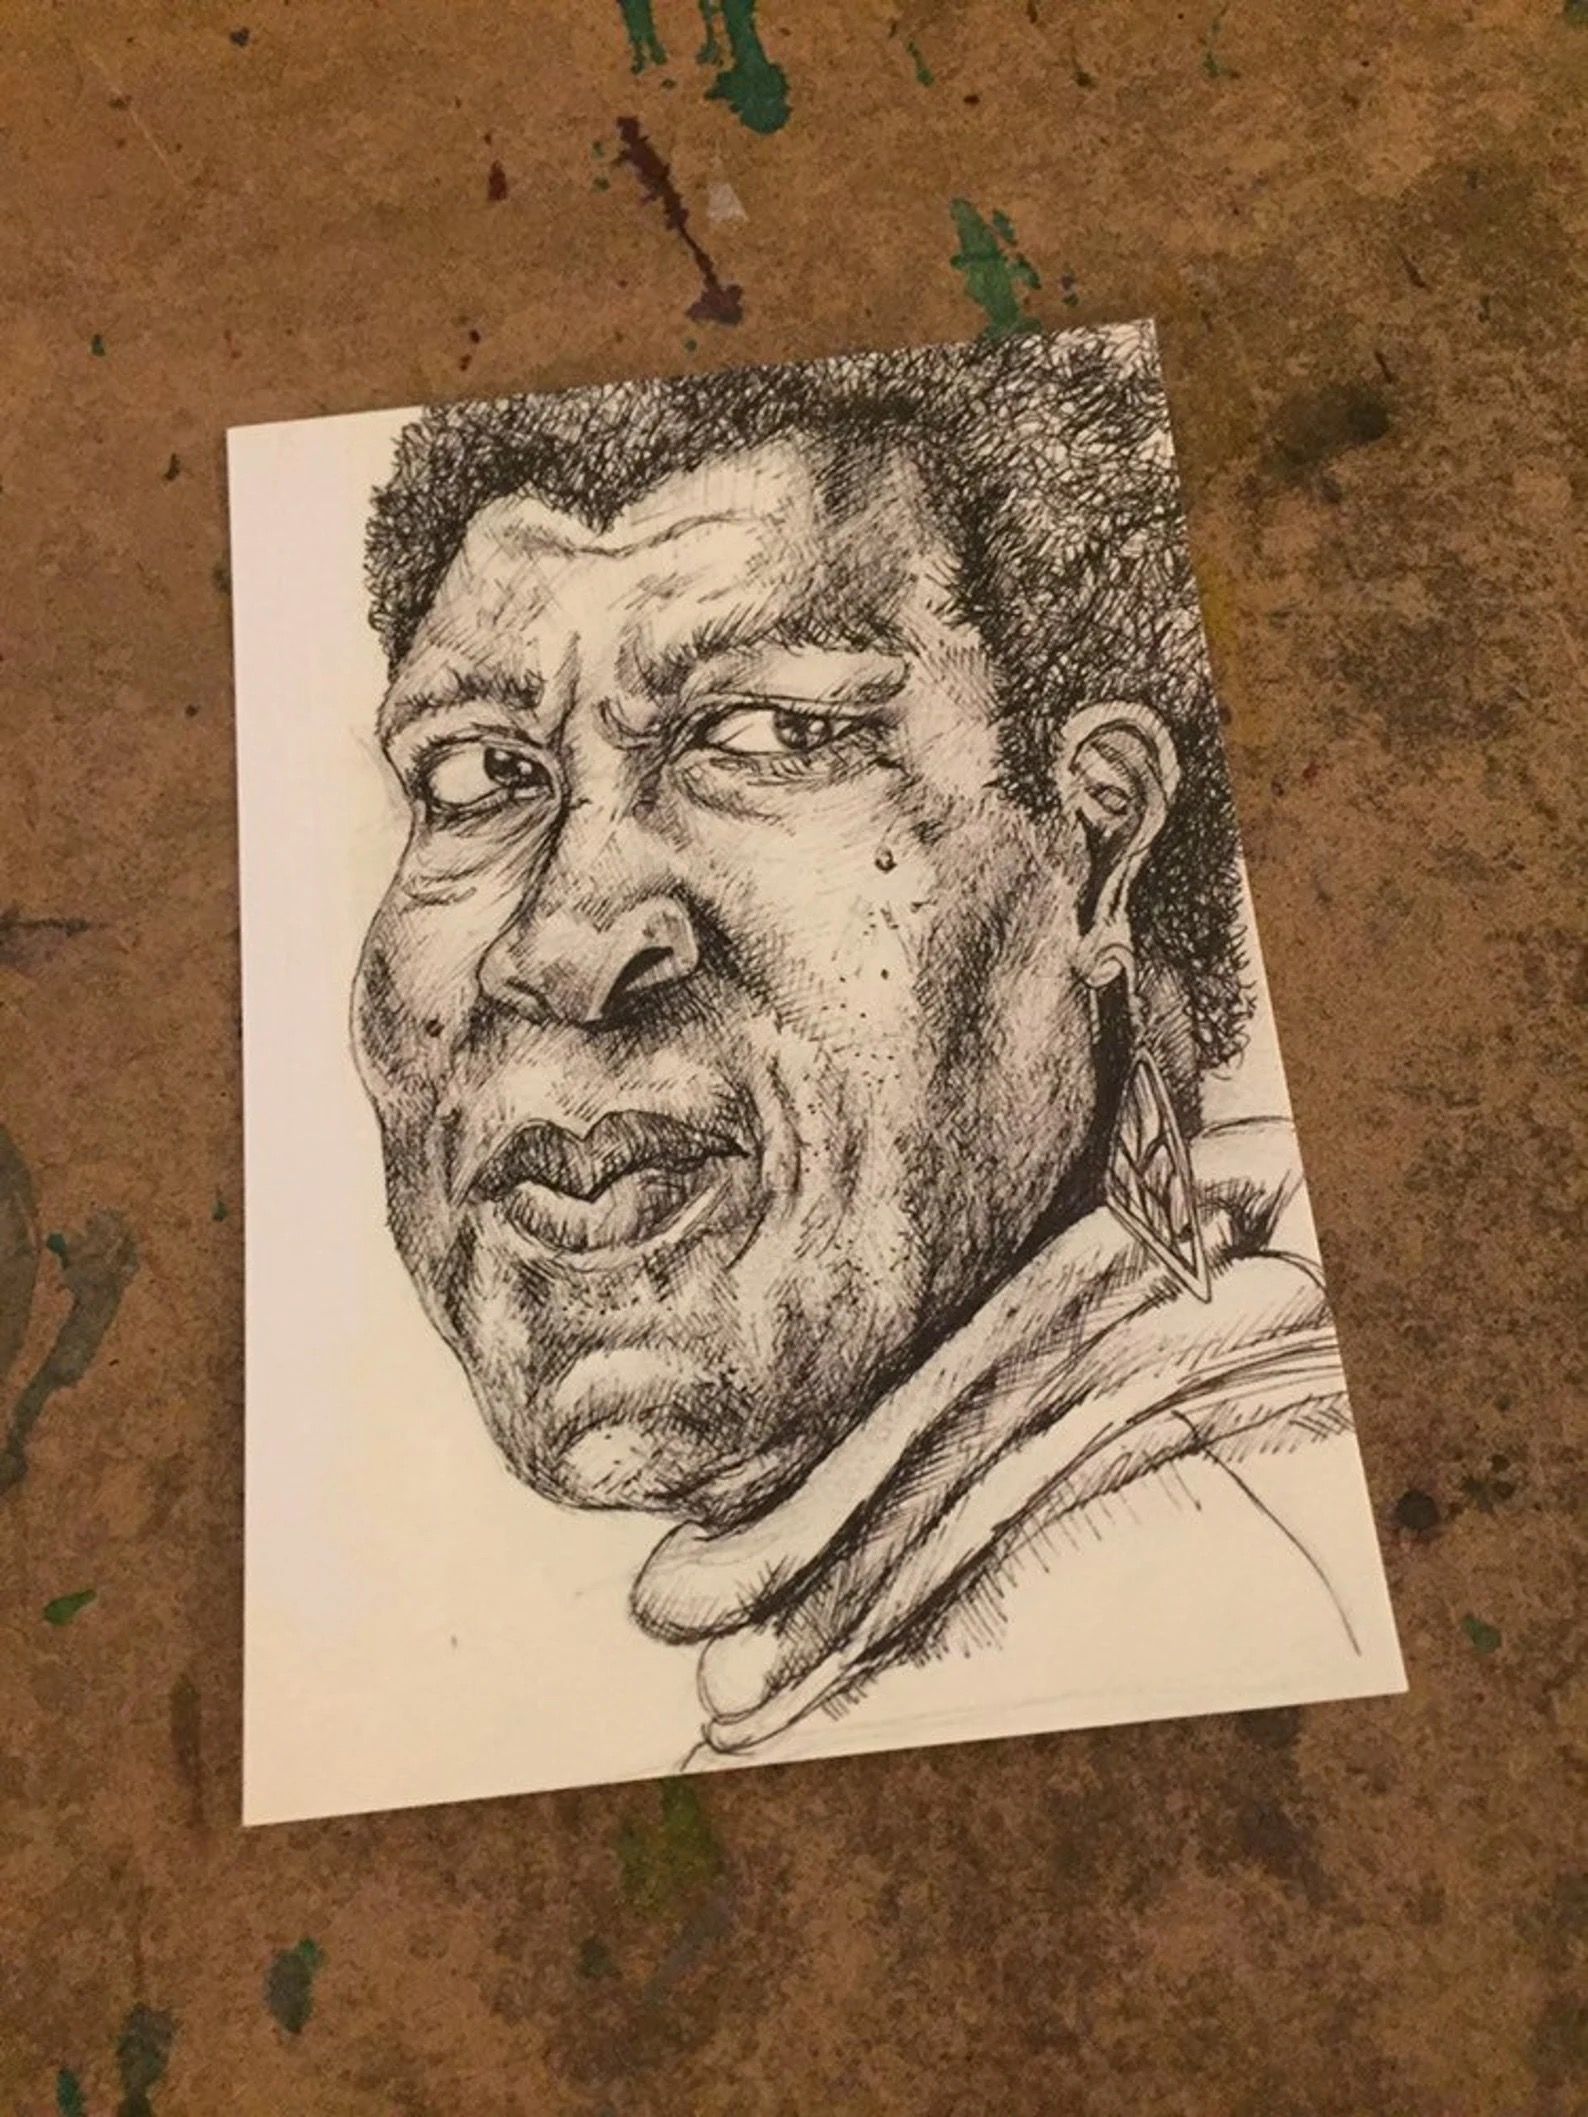 Postcard with a black and white ink sketch of Octavia Butler's face.